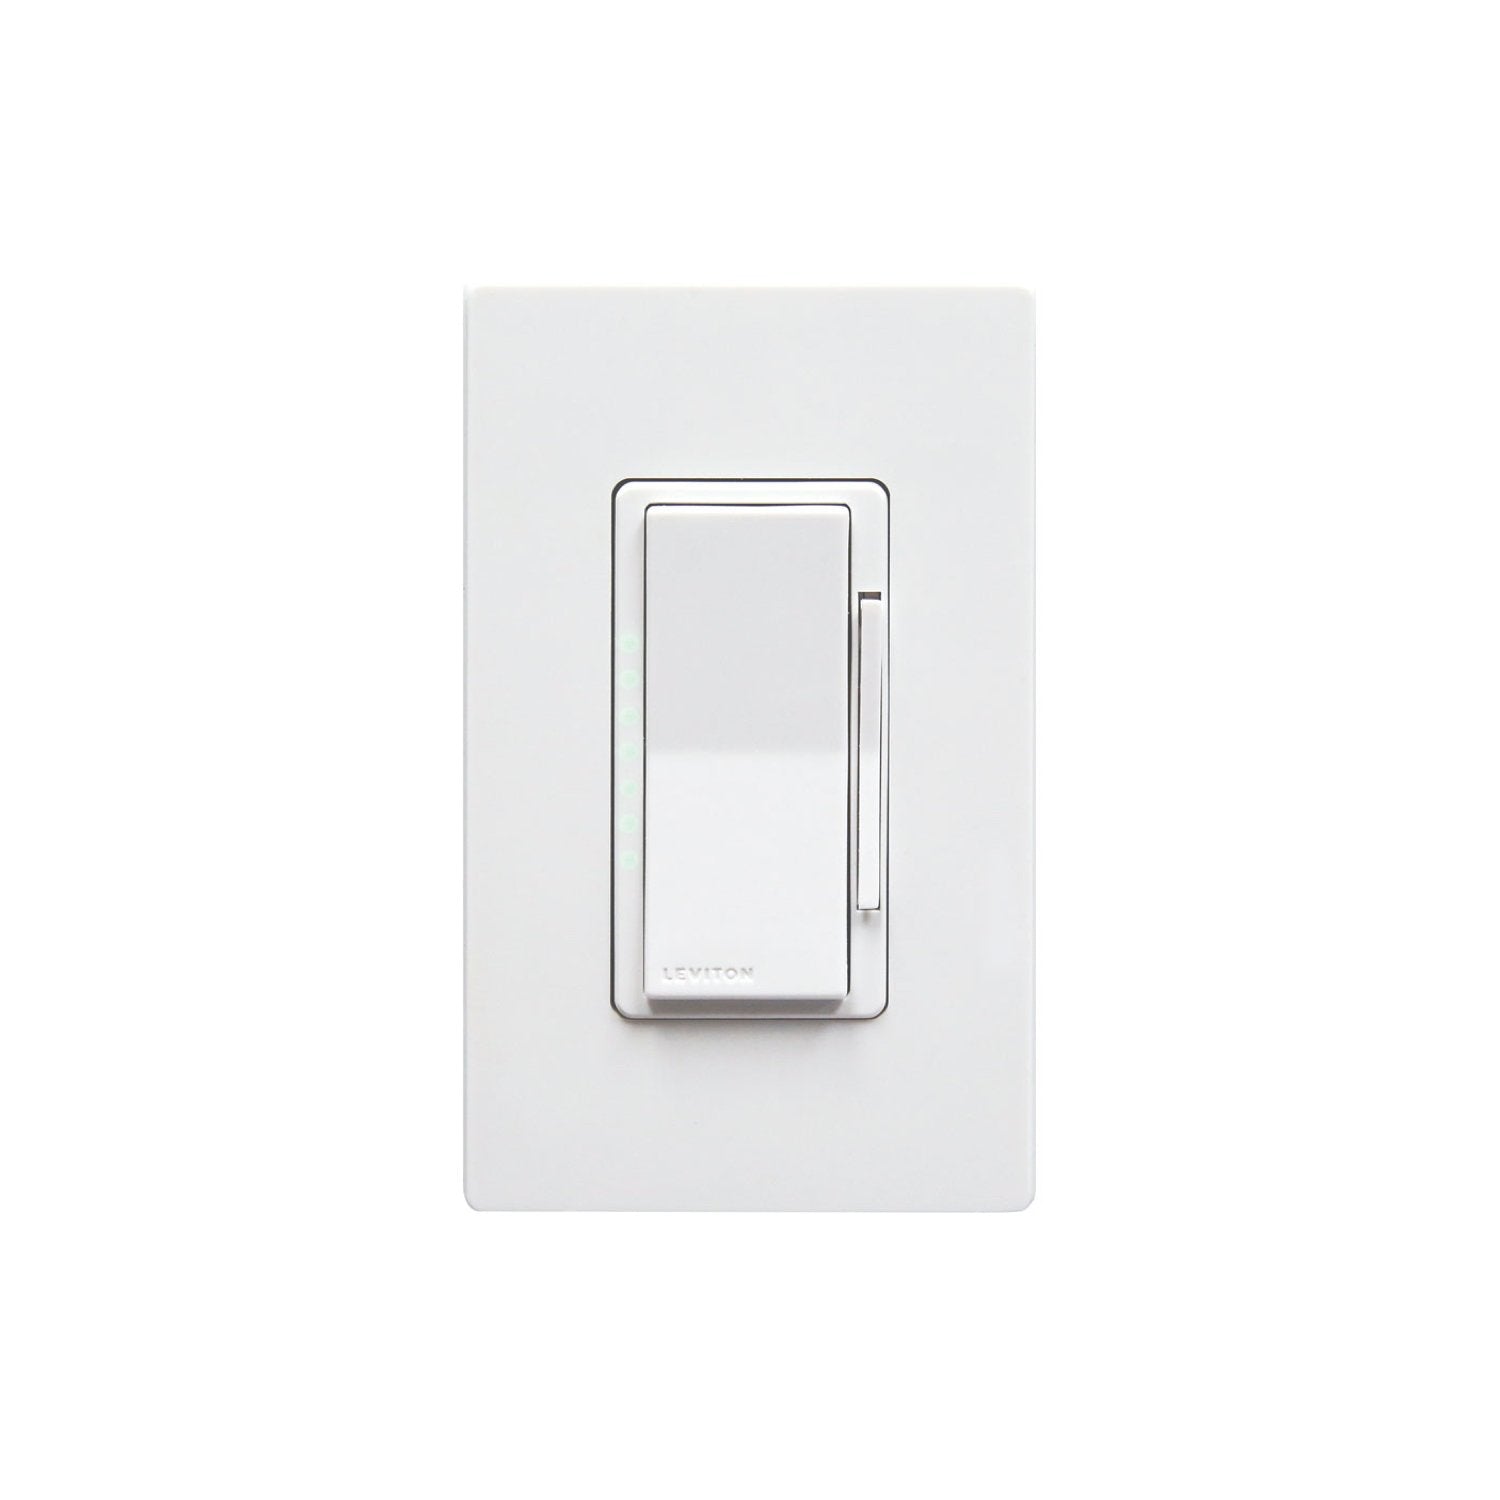 Leviton Decora Smart In-Wall Dimmer (for Works with Ring Alarm Security System) - White